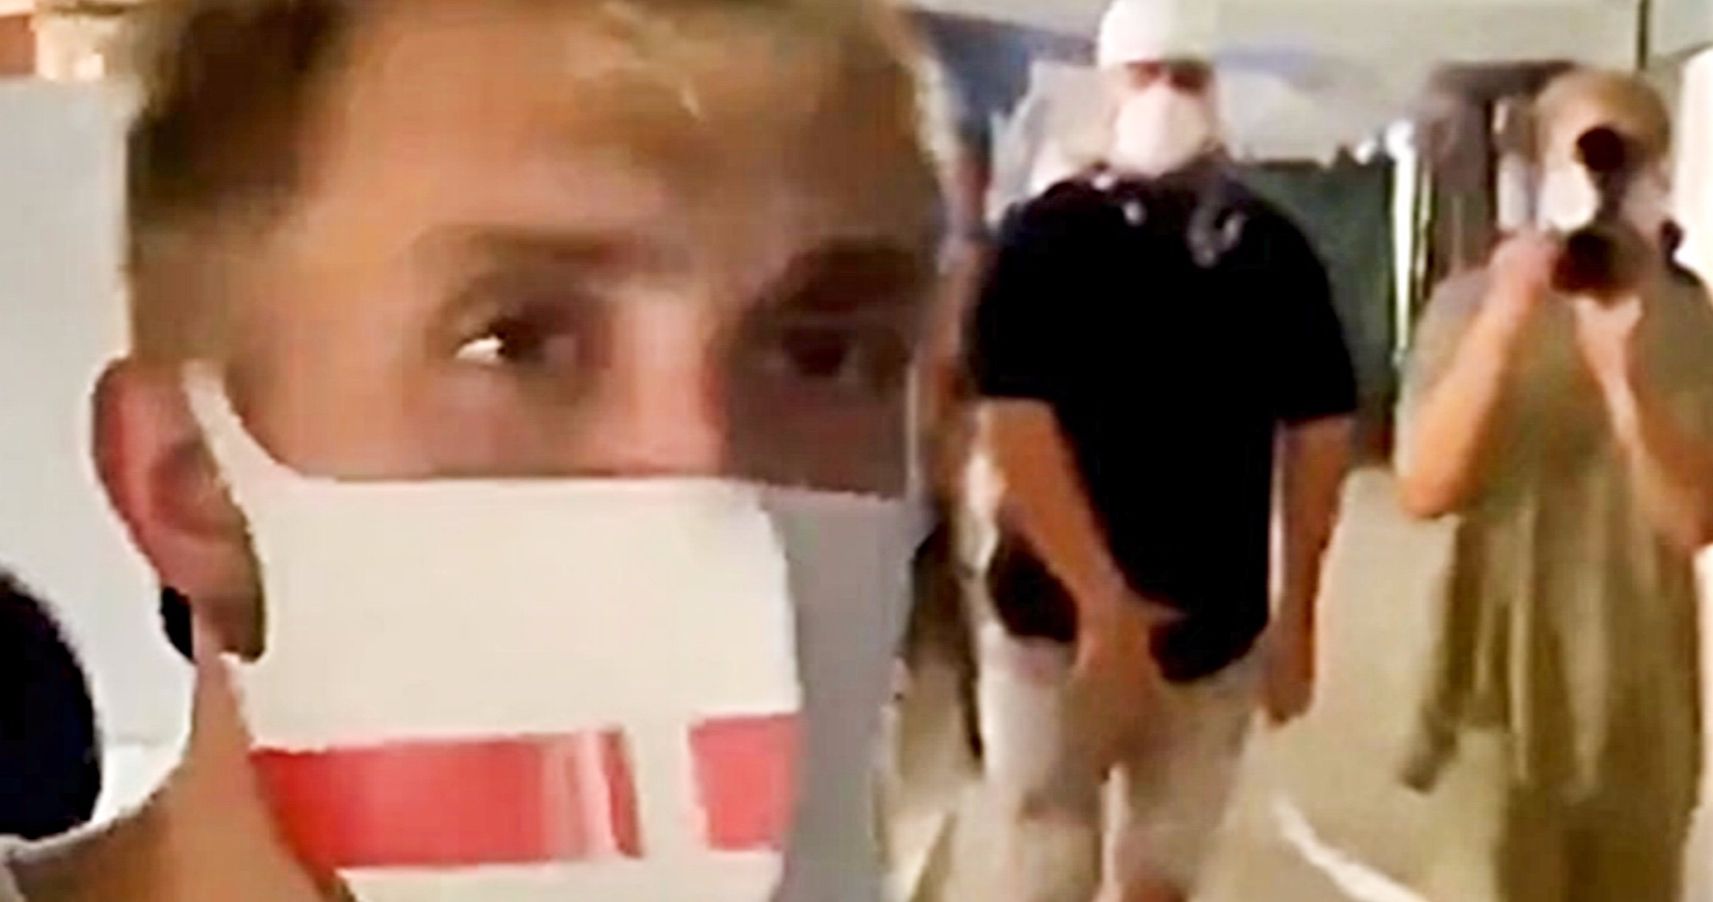 YouTube Star Jake Paul Accused of Looting, Claims He Was Documenting